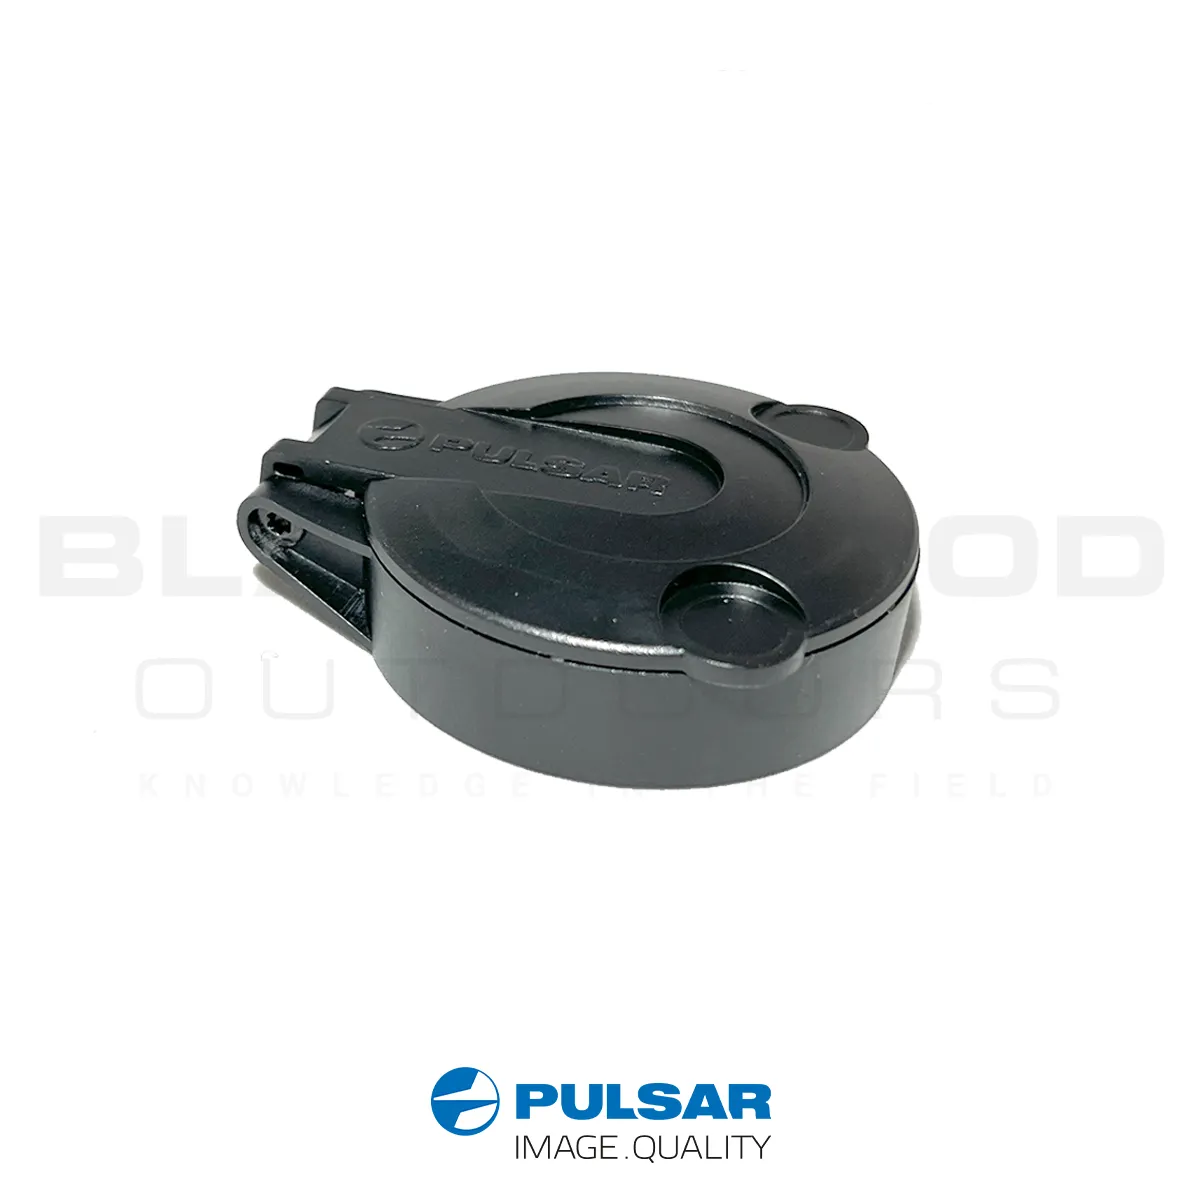 Pulsar Trail XQ50 and XP50 replacement lens cap